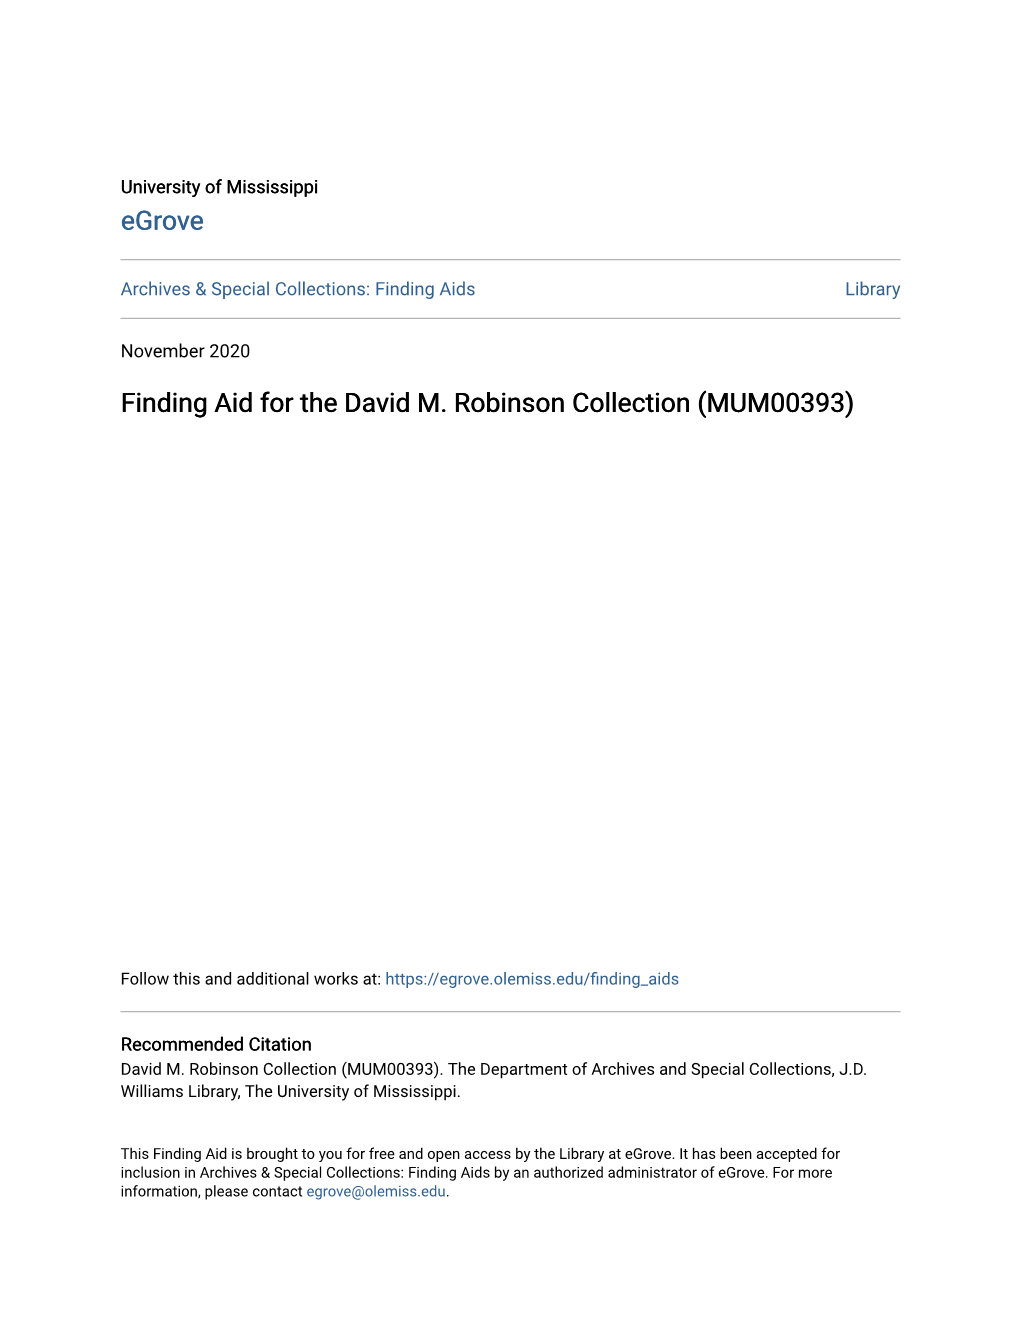 Finding Aid for the David M. Robinson Collection (MUM00393)